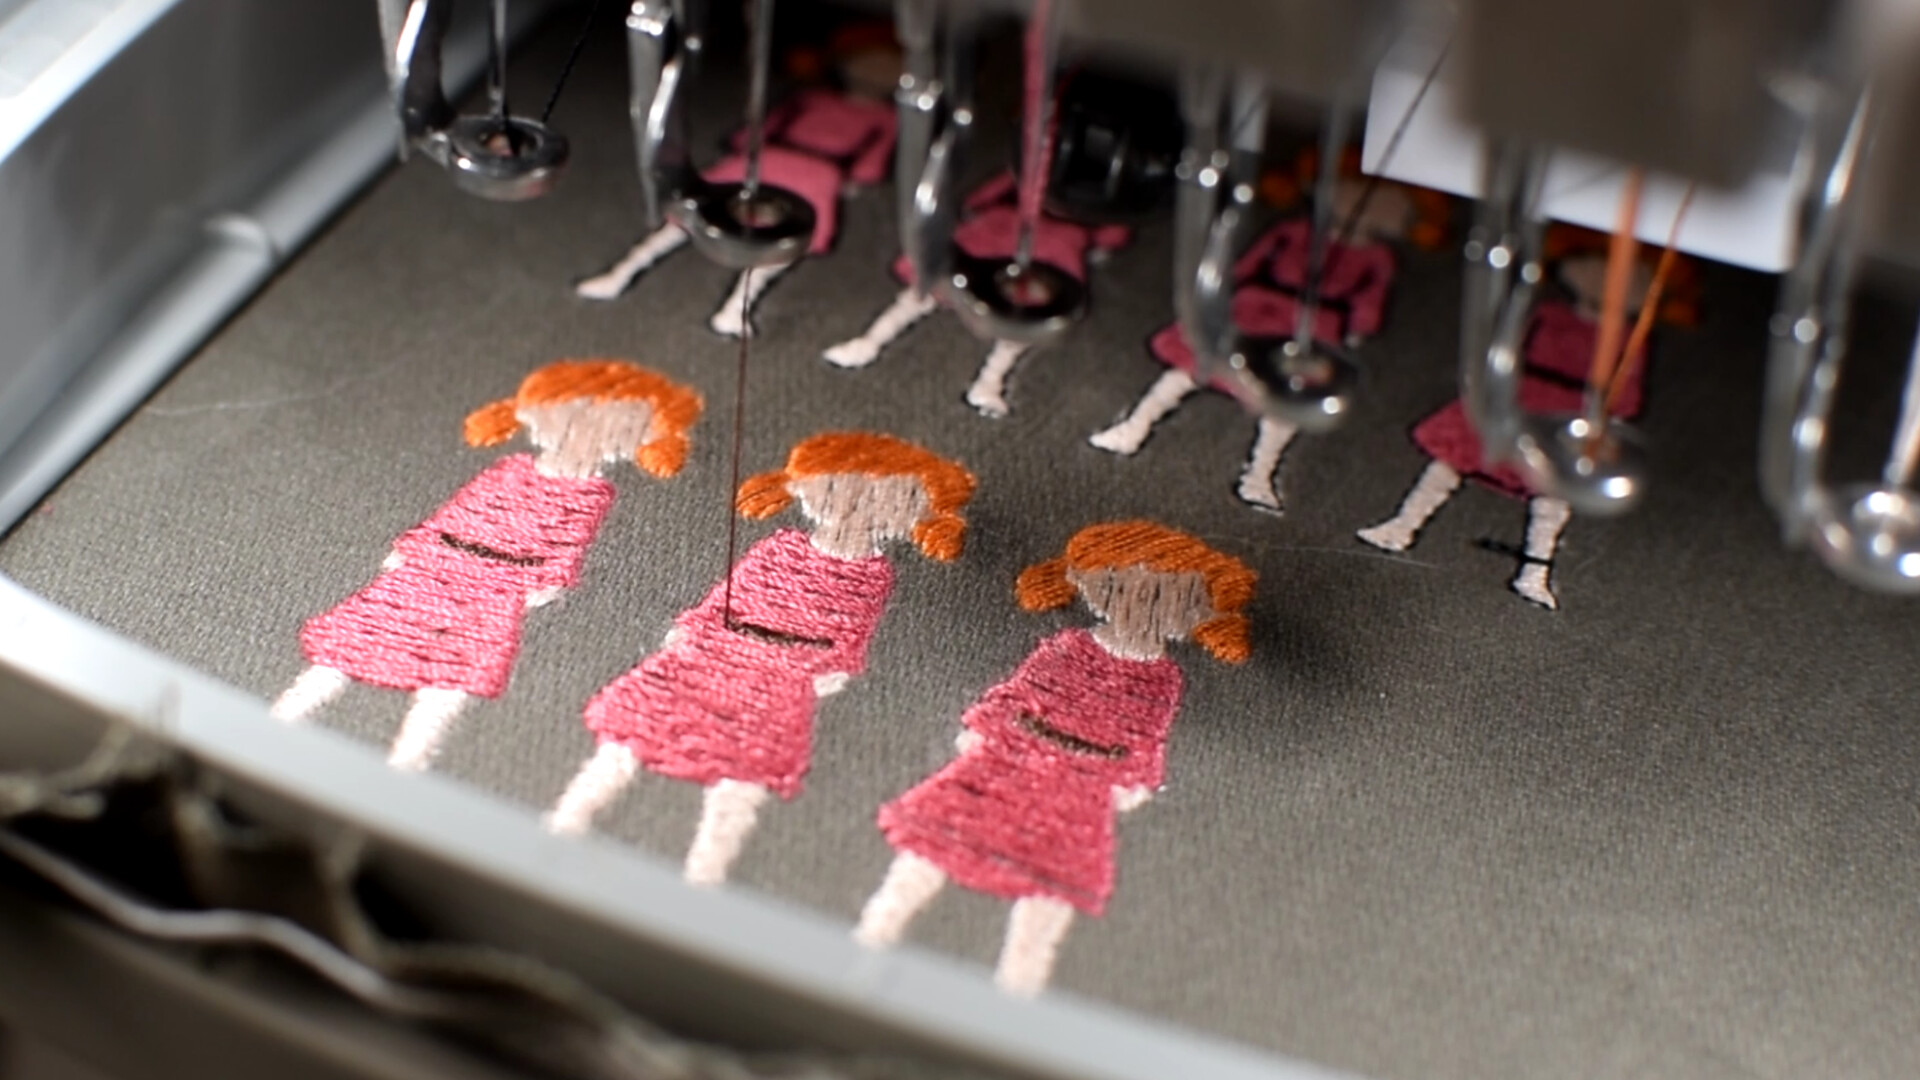 Close up of sprites of young girl in pink dress being embroidered on dark cloth